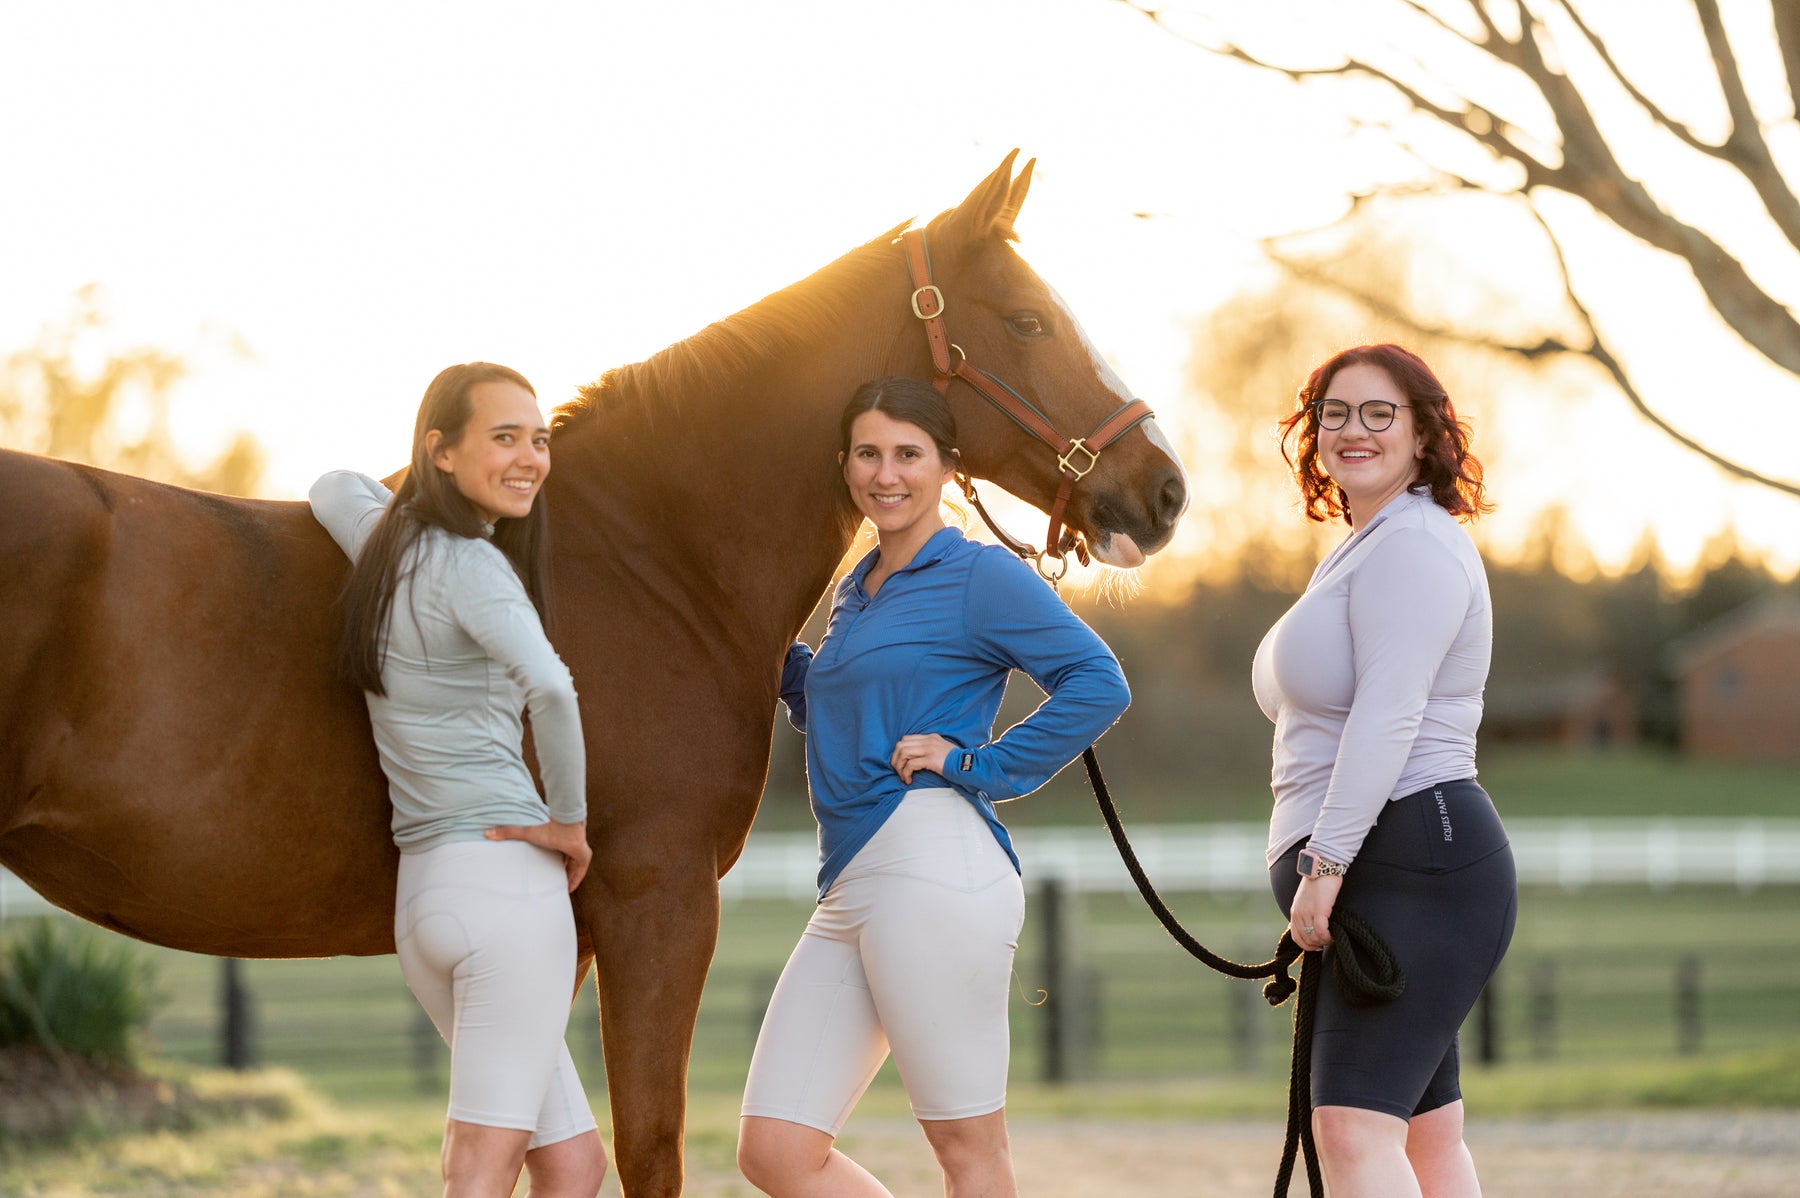 Riding Pants: Why You Need Them When Horseback Riding